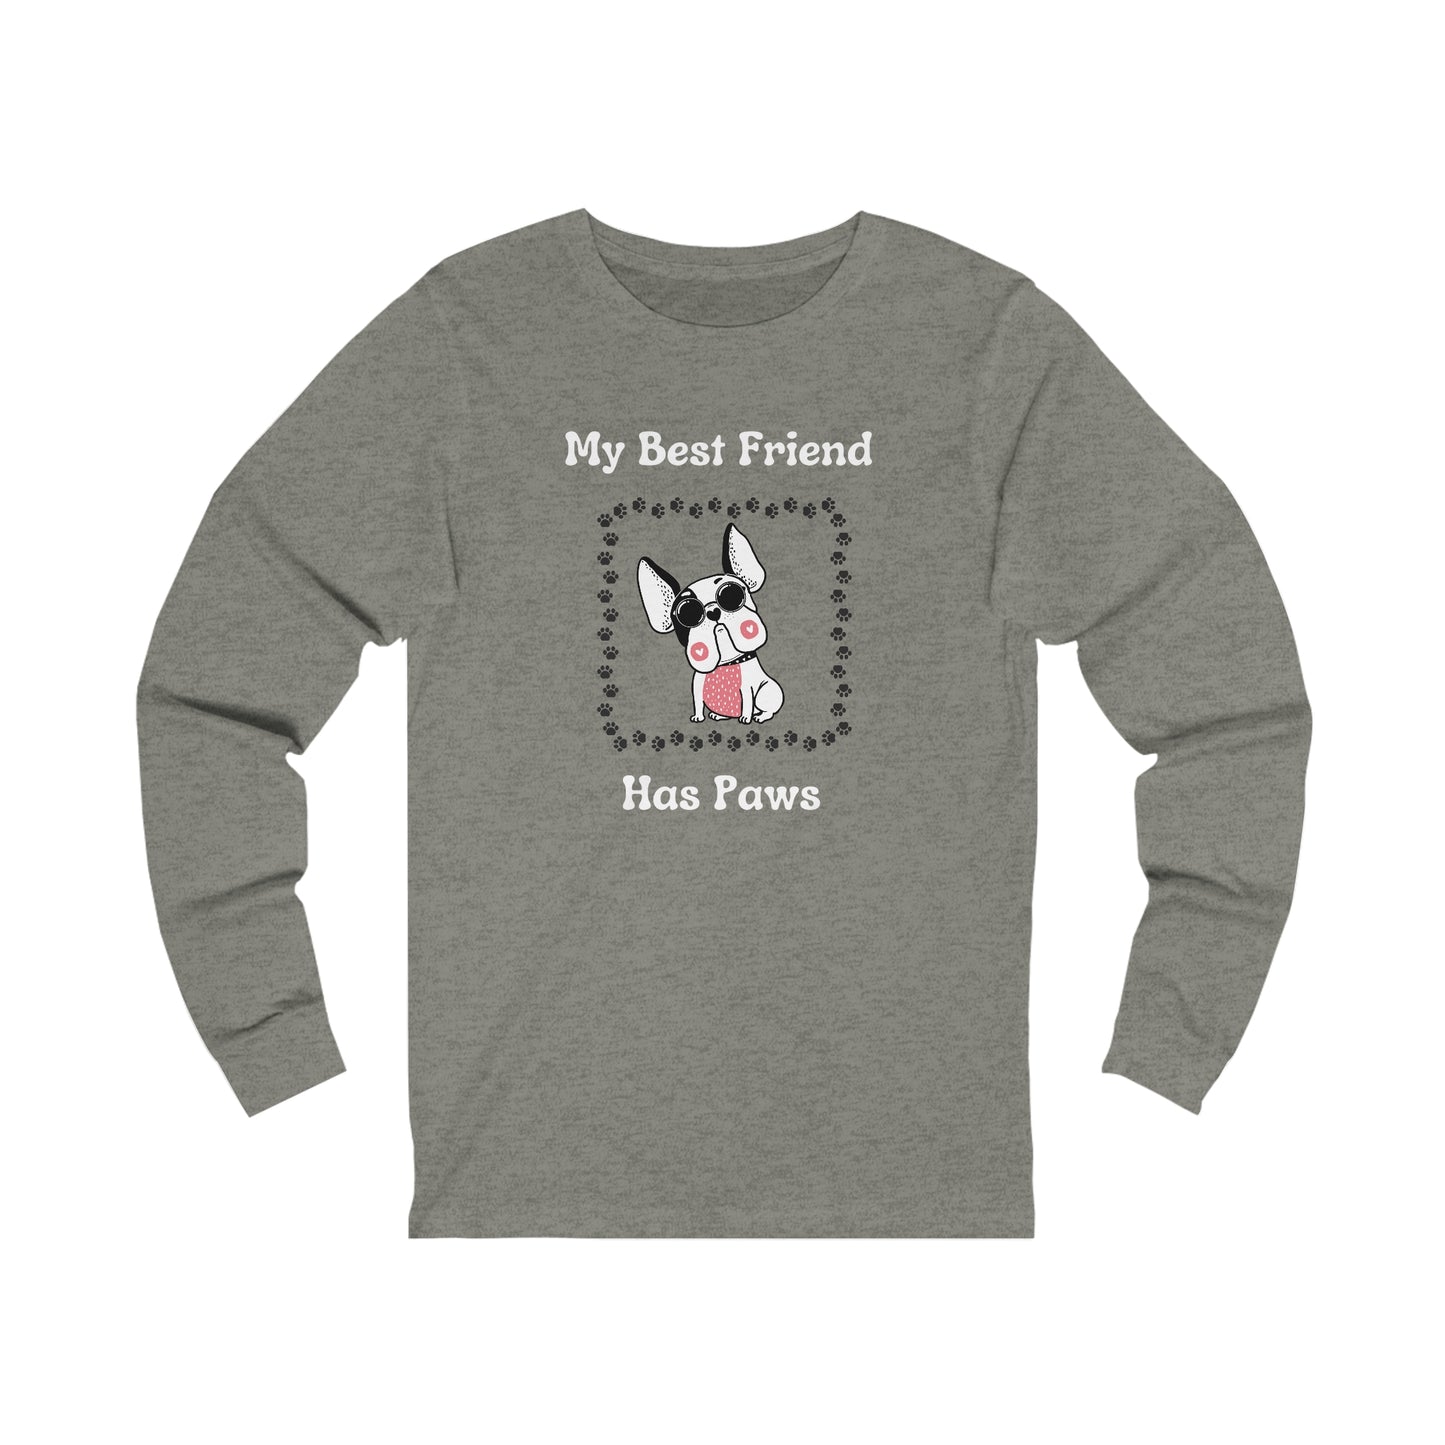 Frenchie The Bull dog. My Best Friend Has Paws. Unisex Jersey Long Sleeve Tee